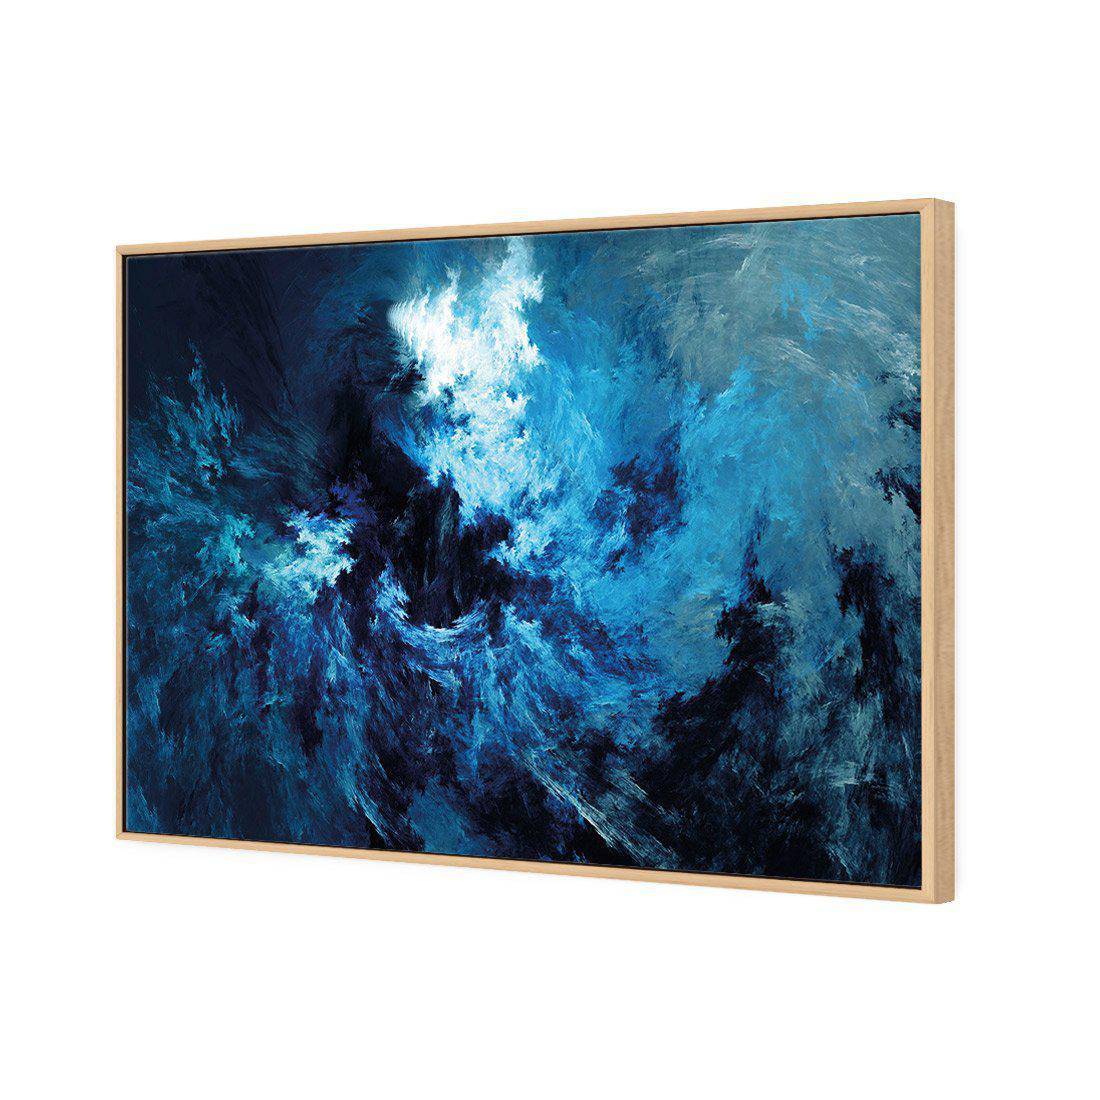 Into the Storm Canvas Art-Canvas-Wall Art Designs-45x30cm-Canvas - Oak Frame-Wall Art Designs